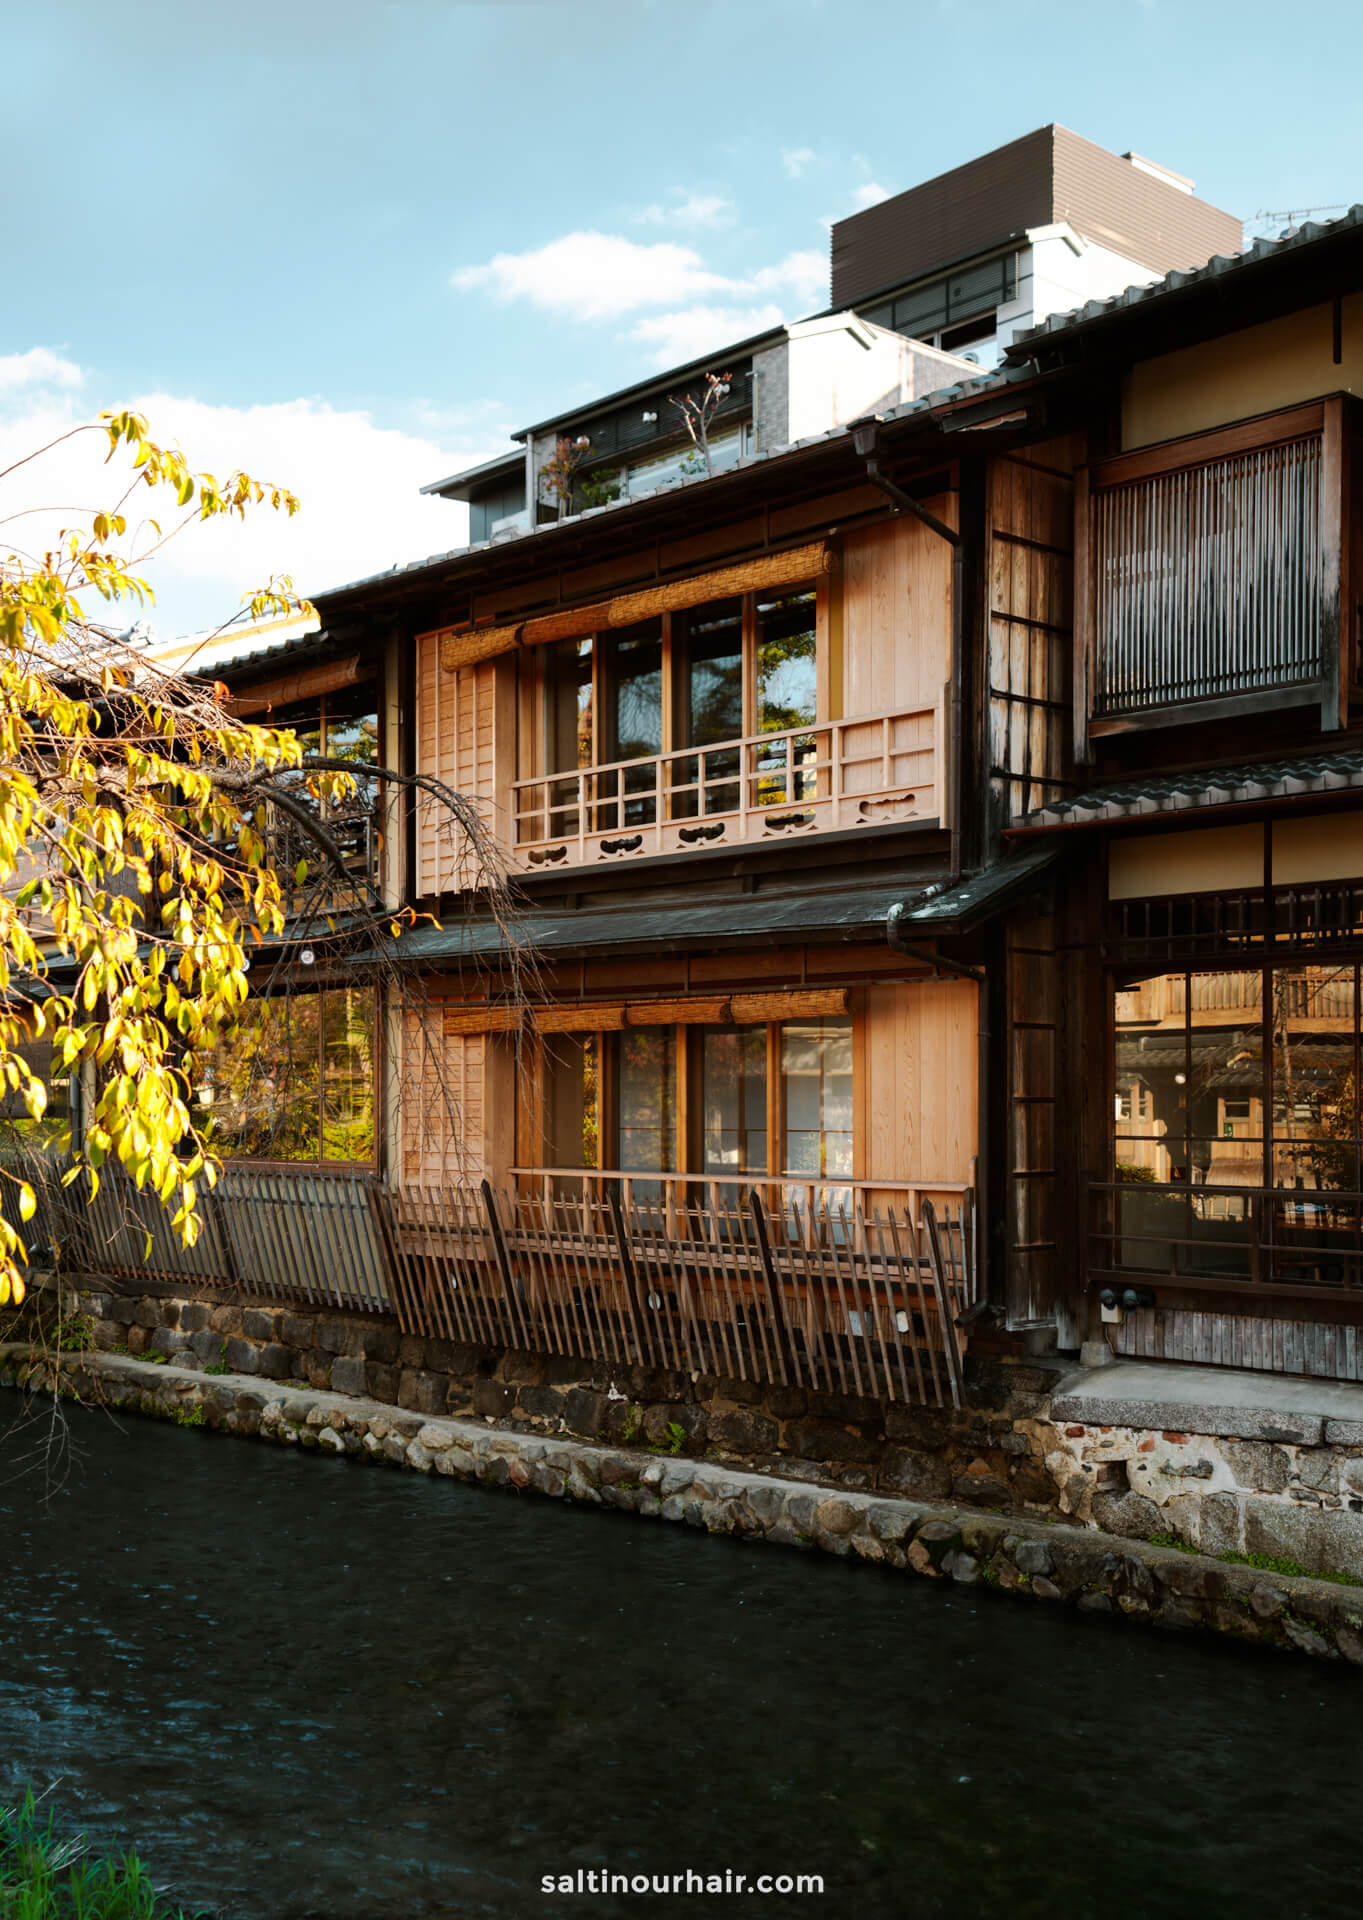 how to travel to in kyoto